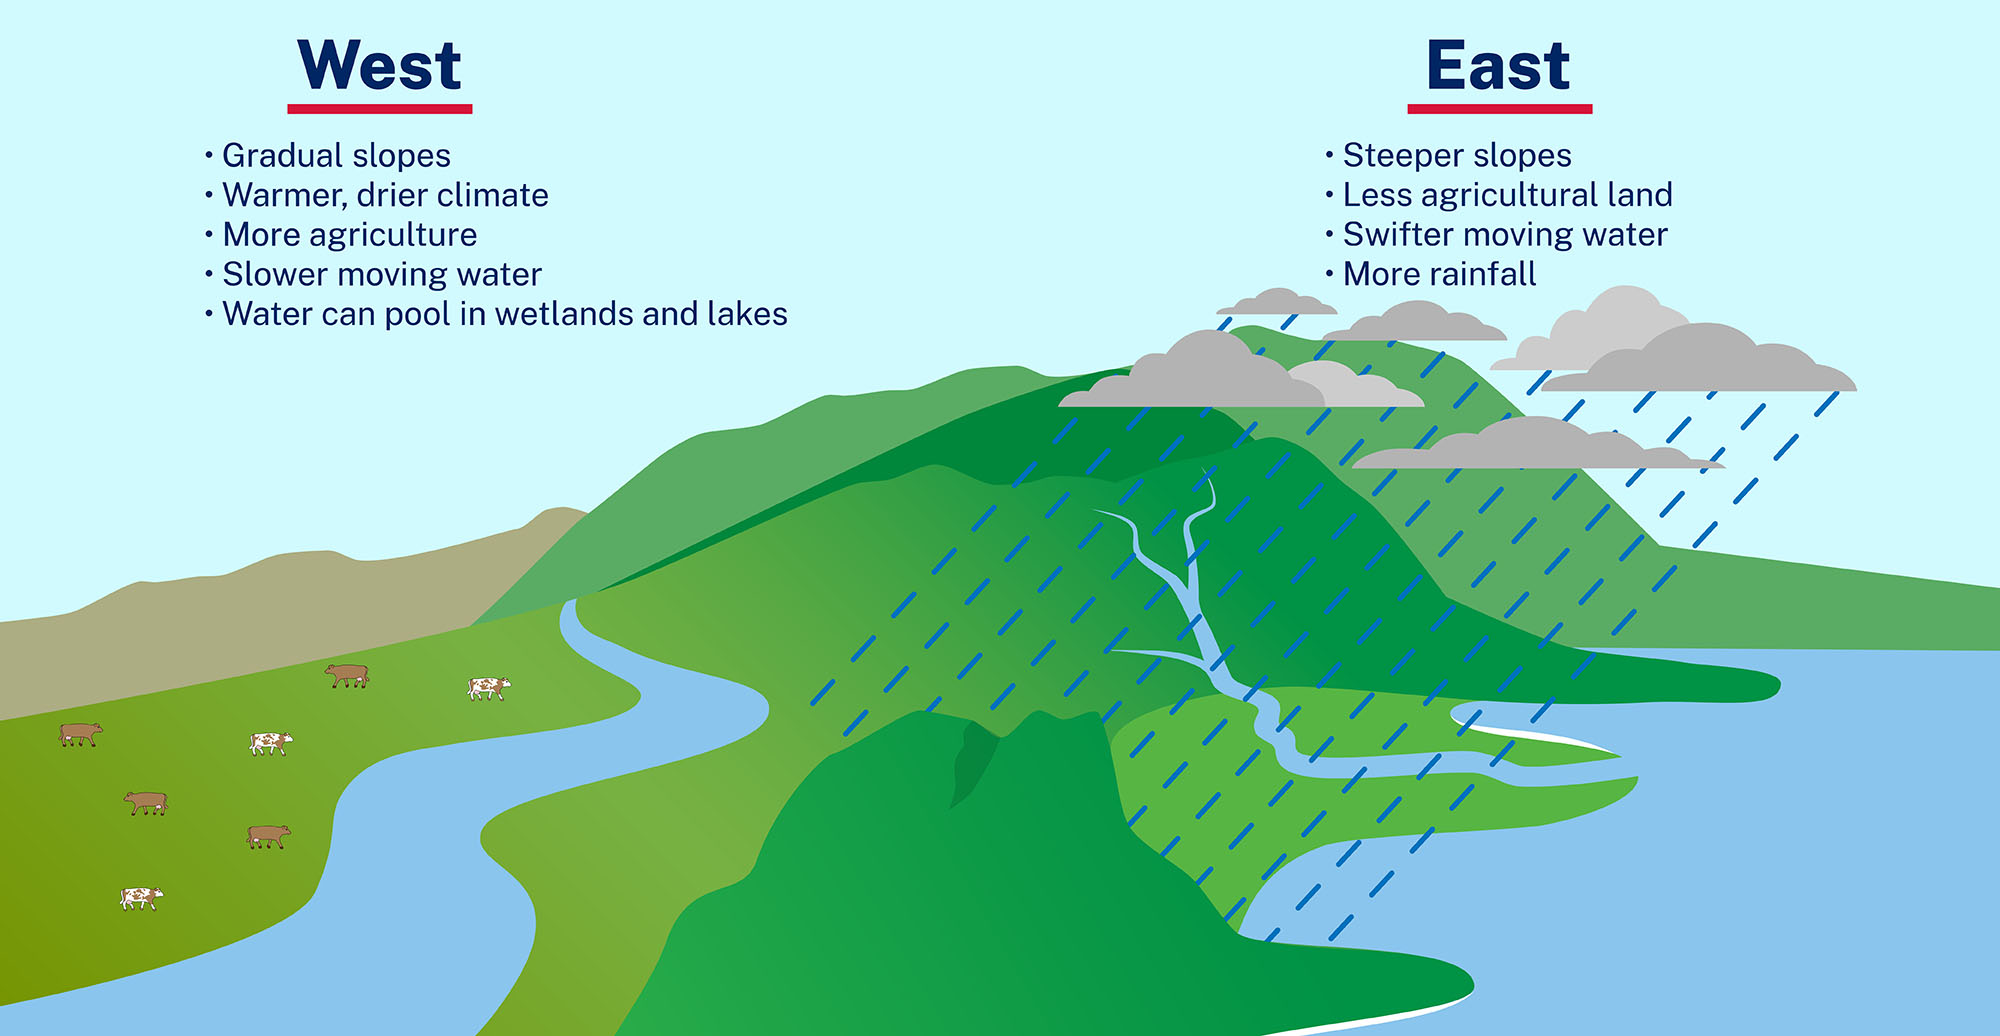 How water behaves differently east and west of the Great Dividing range